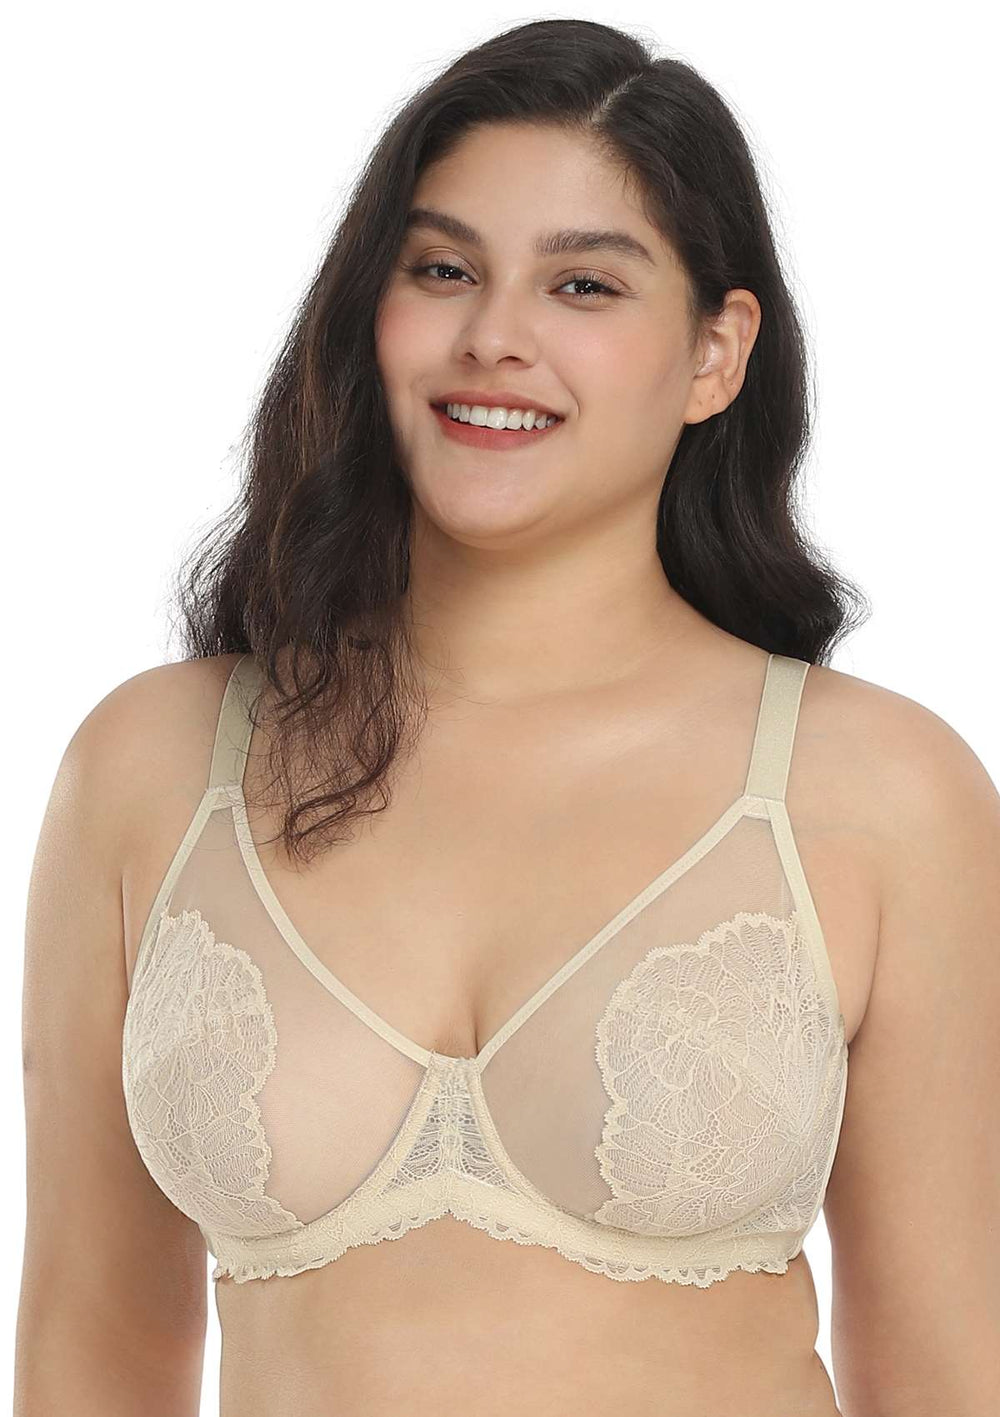 HSIA Joan Smooth Unlined Lifting Minimizer Bra and Panty Set